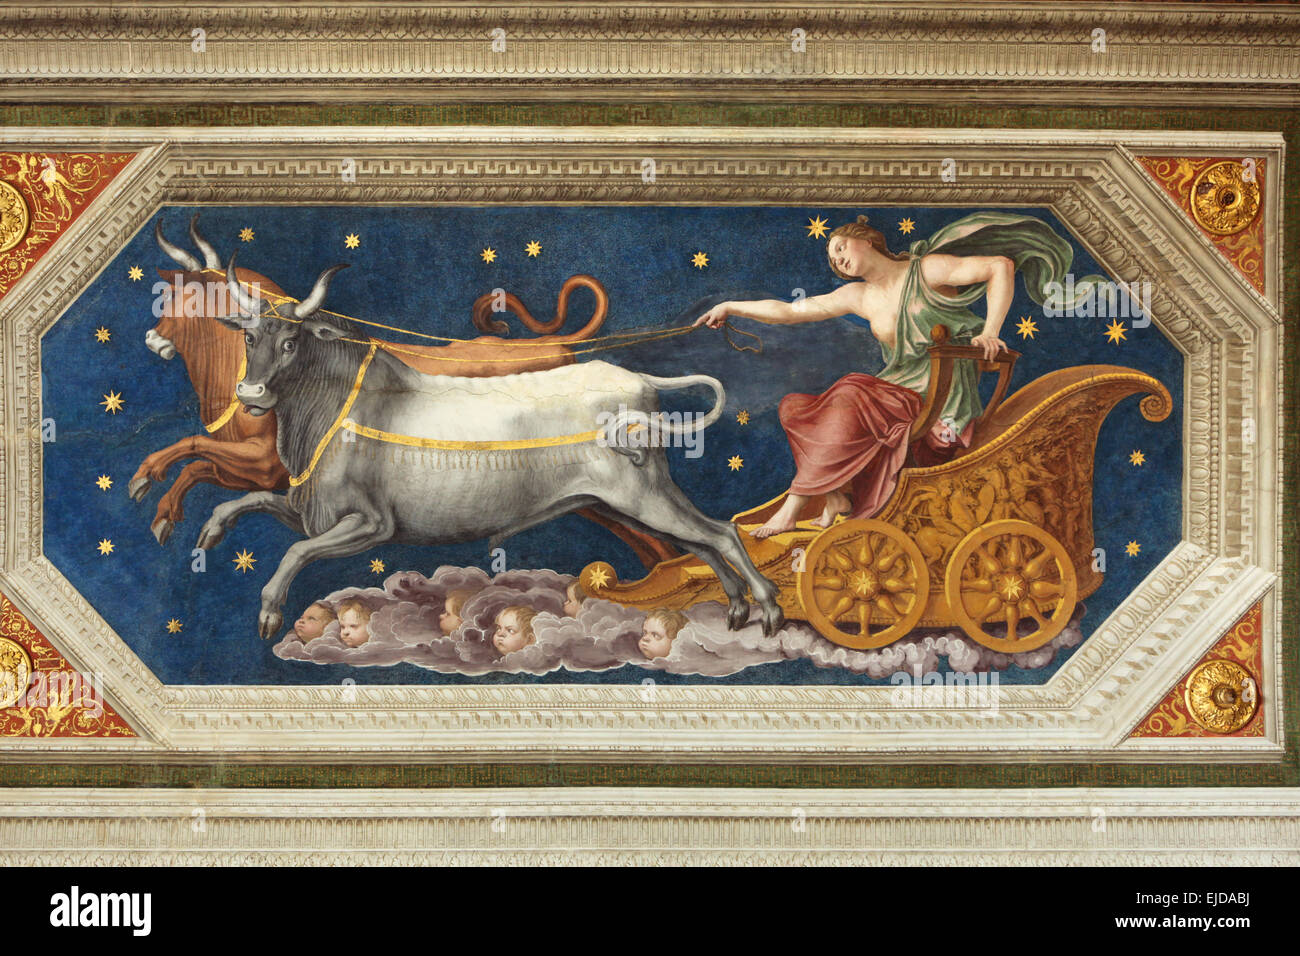 Nymph Callisto on the Chariot. Fresco by Baldassarre Peruzzi at the Loggia of Galatea in the Villa Farnesina in Rome, Italy. Nymph Callisto is depicted on the Jupiter's Chariot of pulled by two bulls being transformed into the Great Bear constellation. Stock Photo